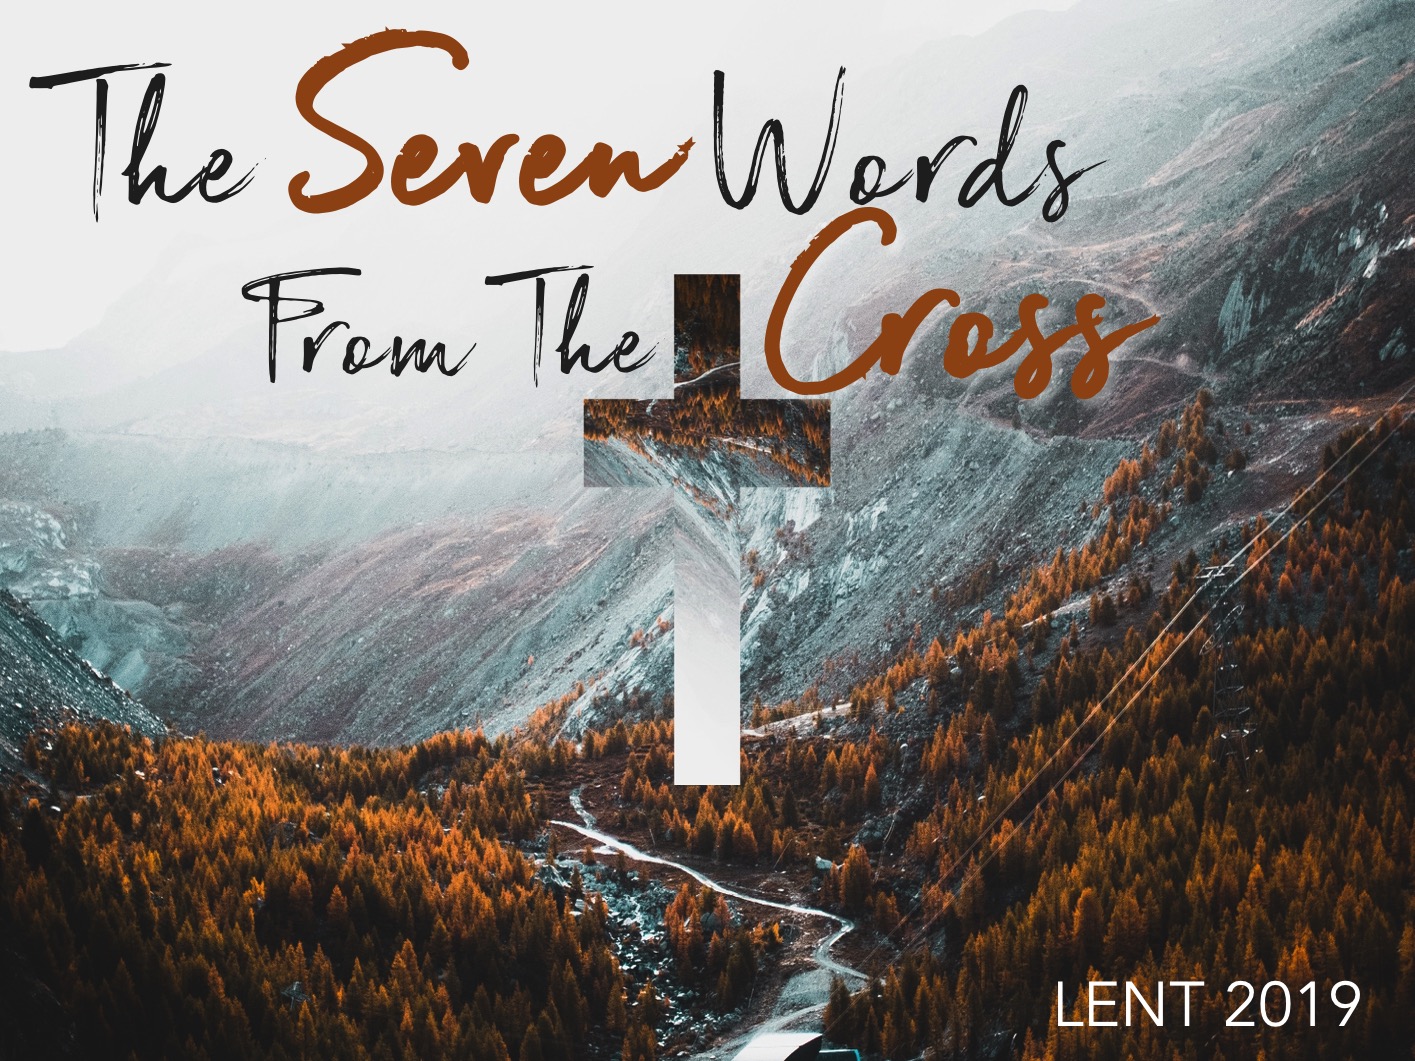 The Seven Words From The Cross: Sunday March 17, 2019